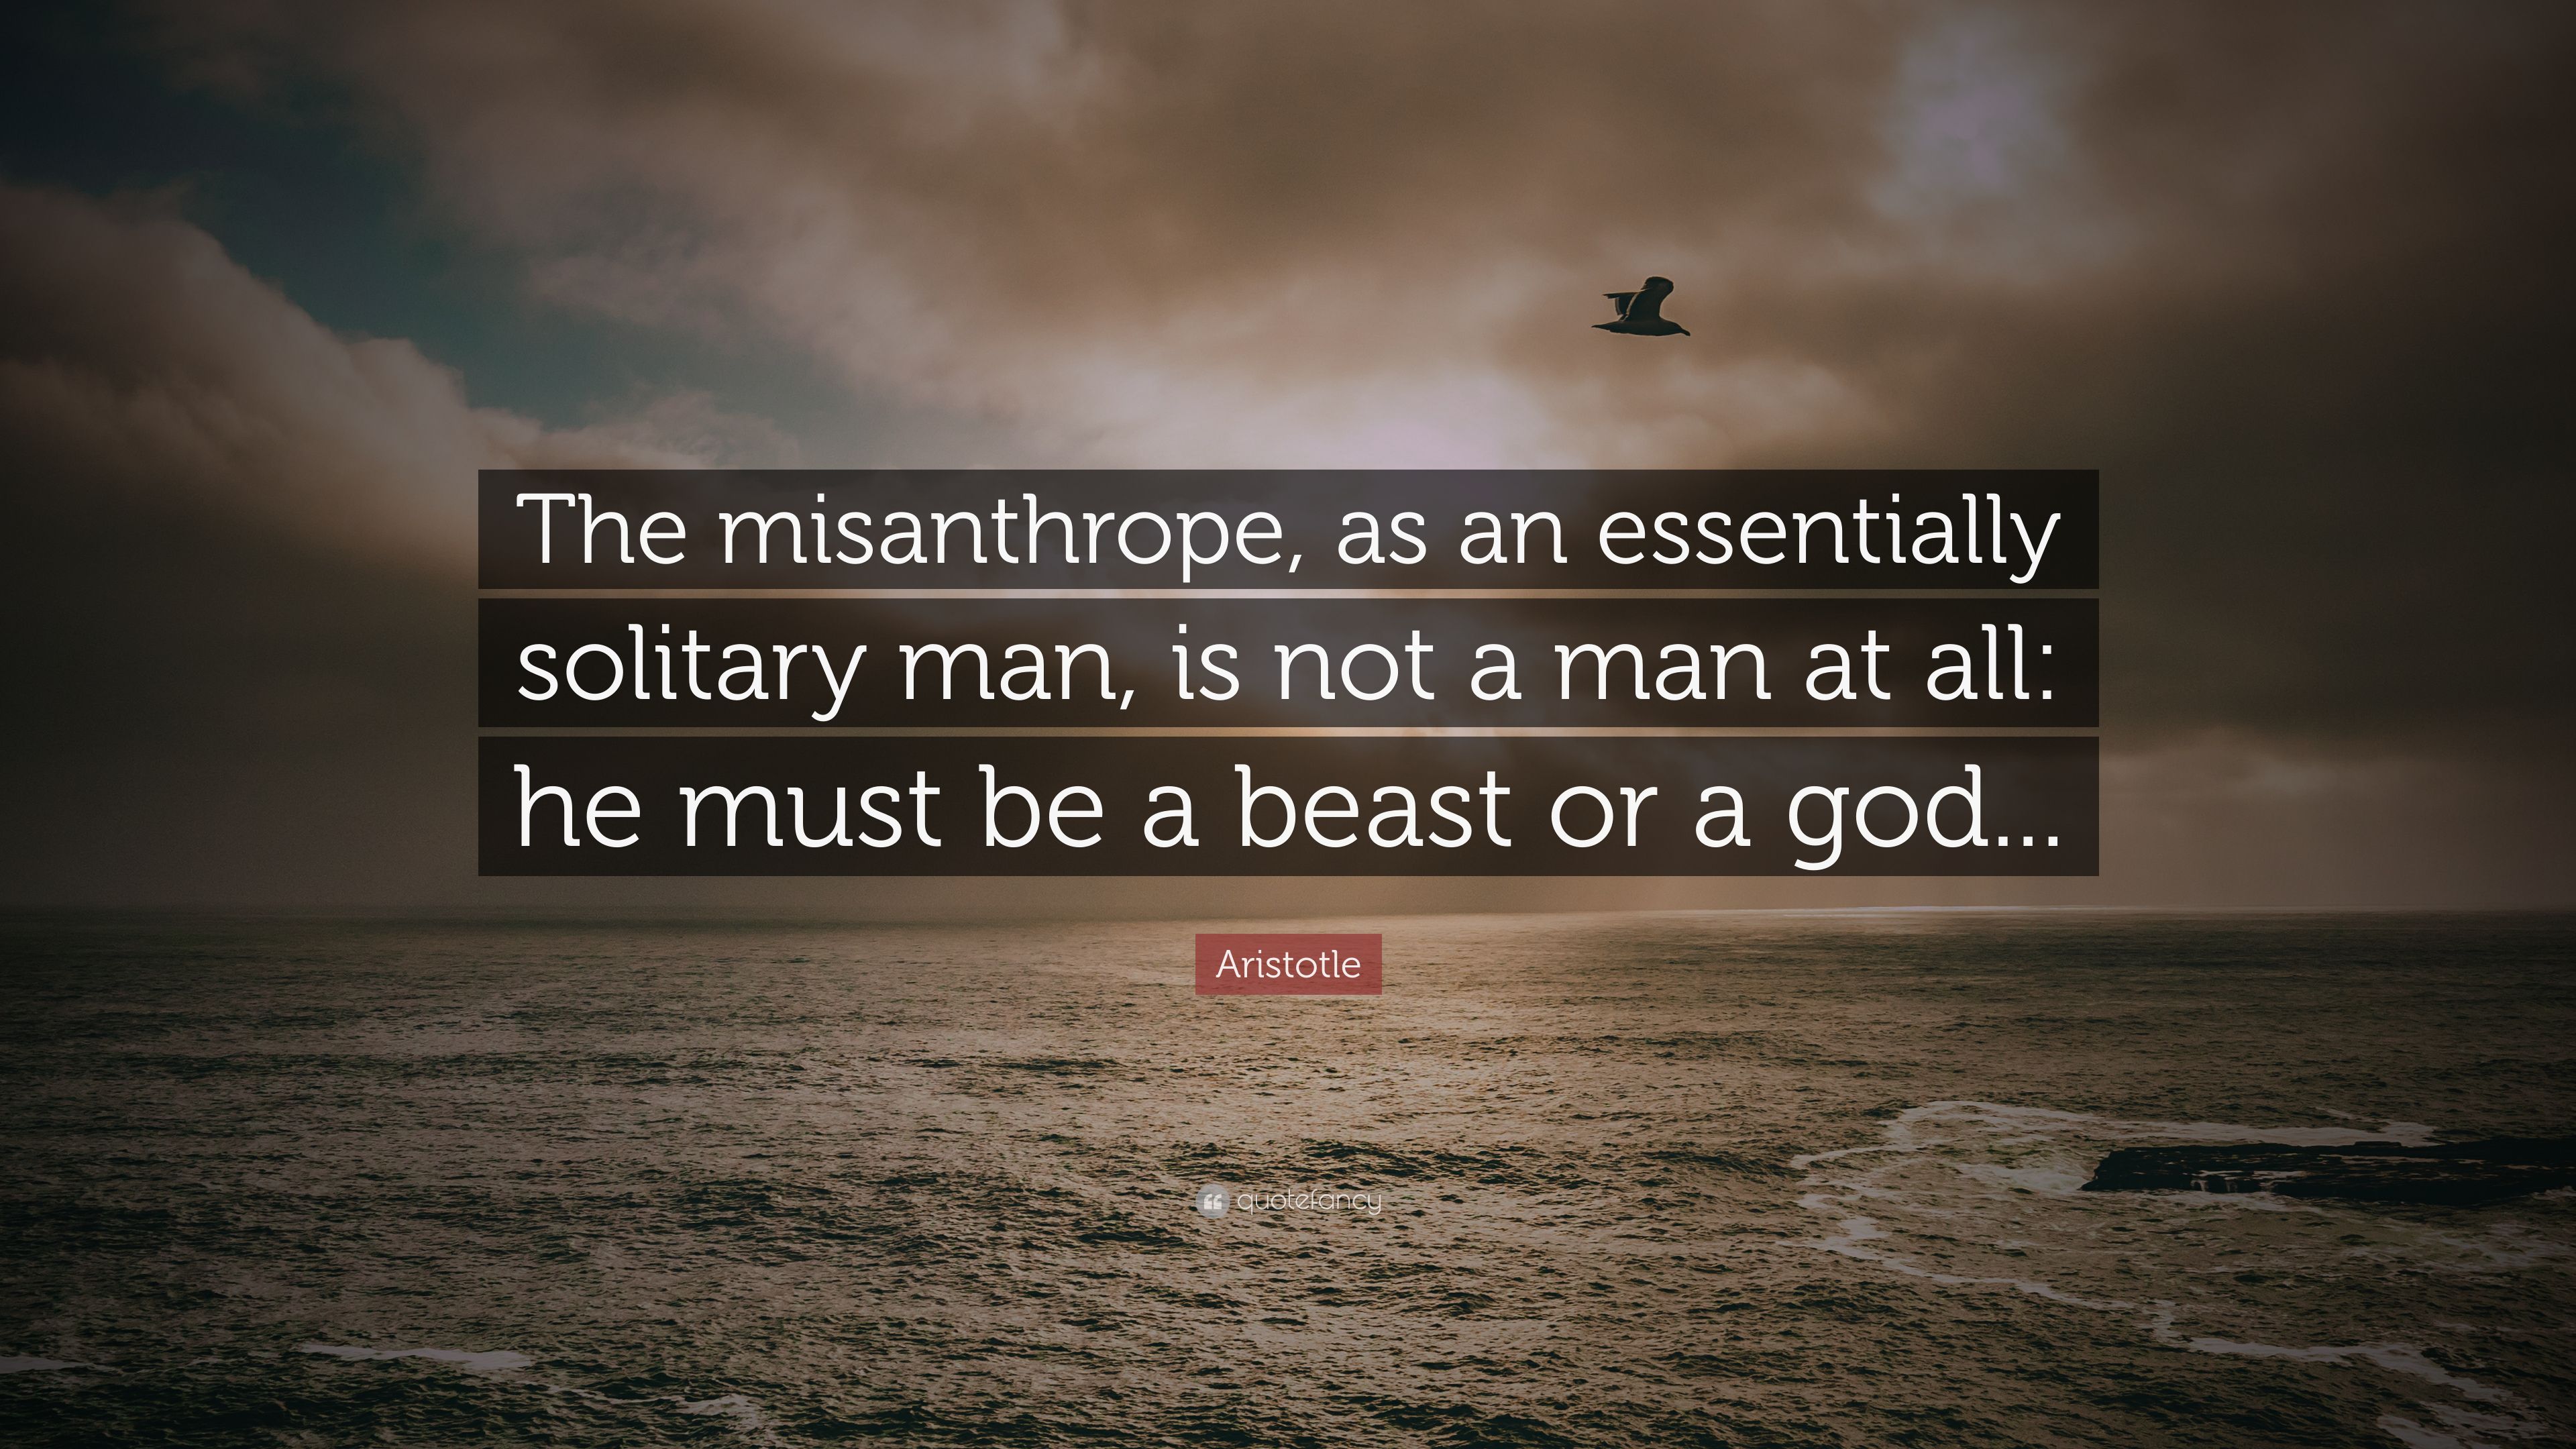 Aristotle Quote: “The misanthrope, as an essentially solitary man, is not a man at all: he